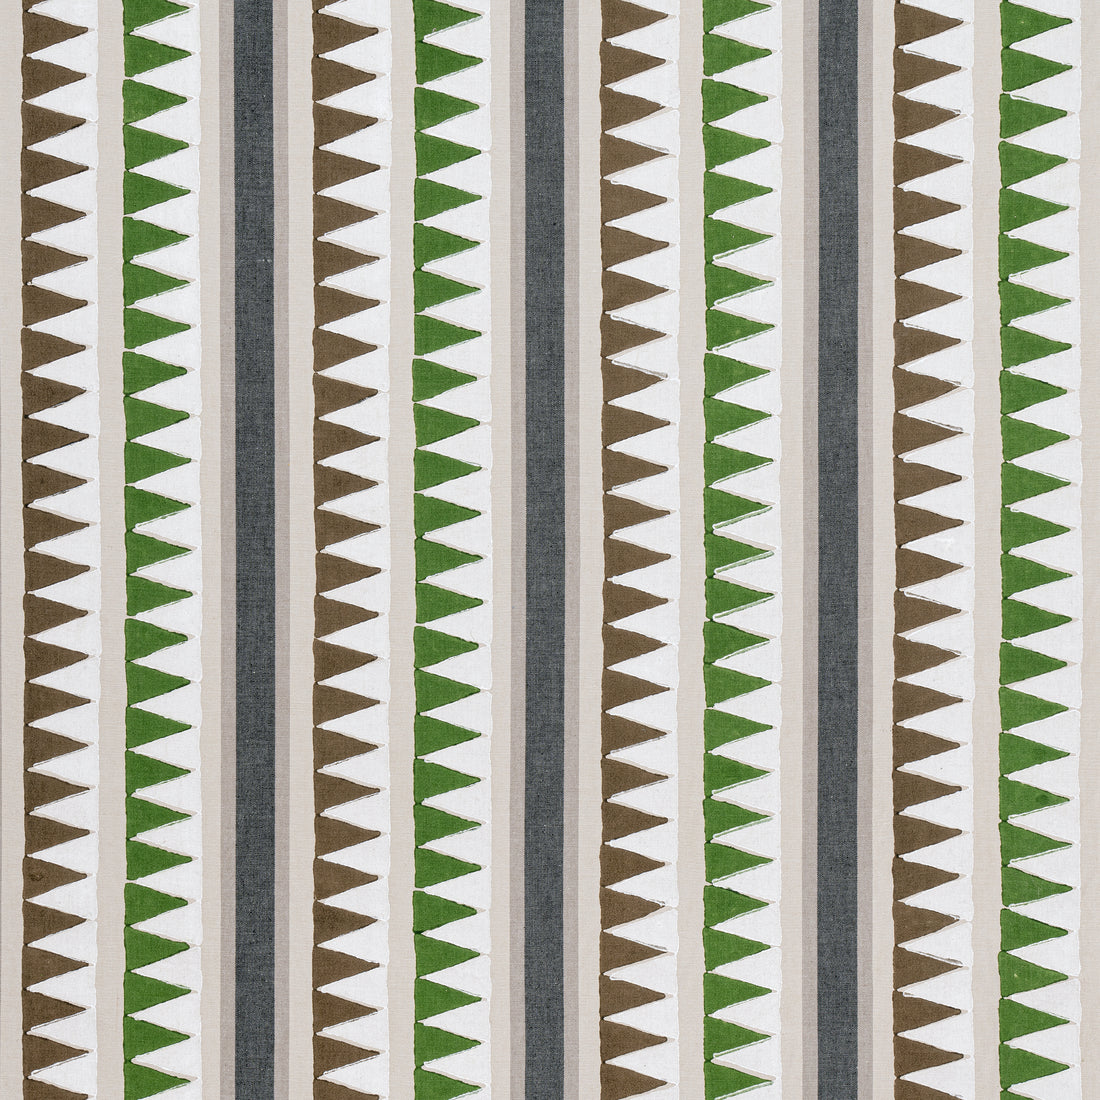 Lomita Stripe fabric in black and green color - pattern number F916235 - by Thibaut in the Kismet collection